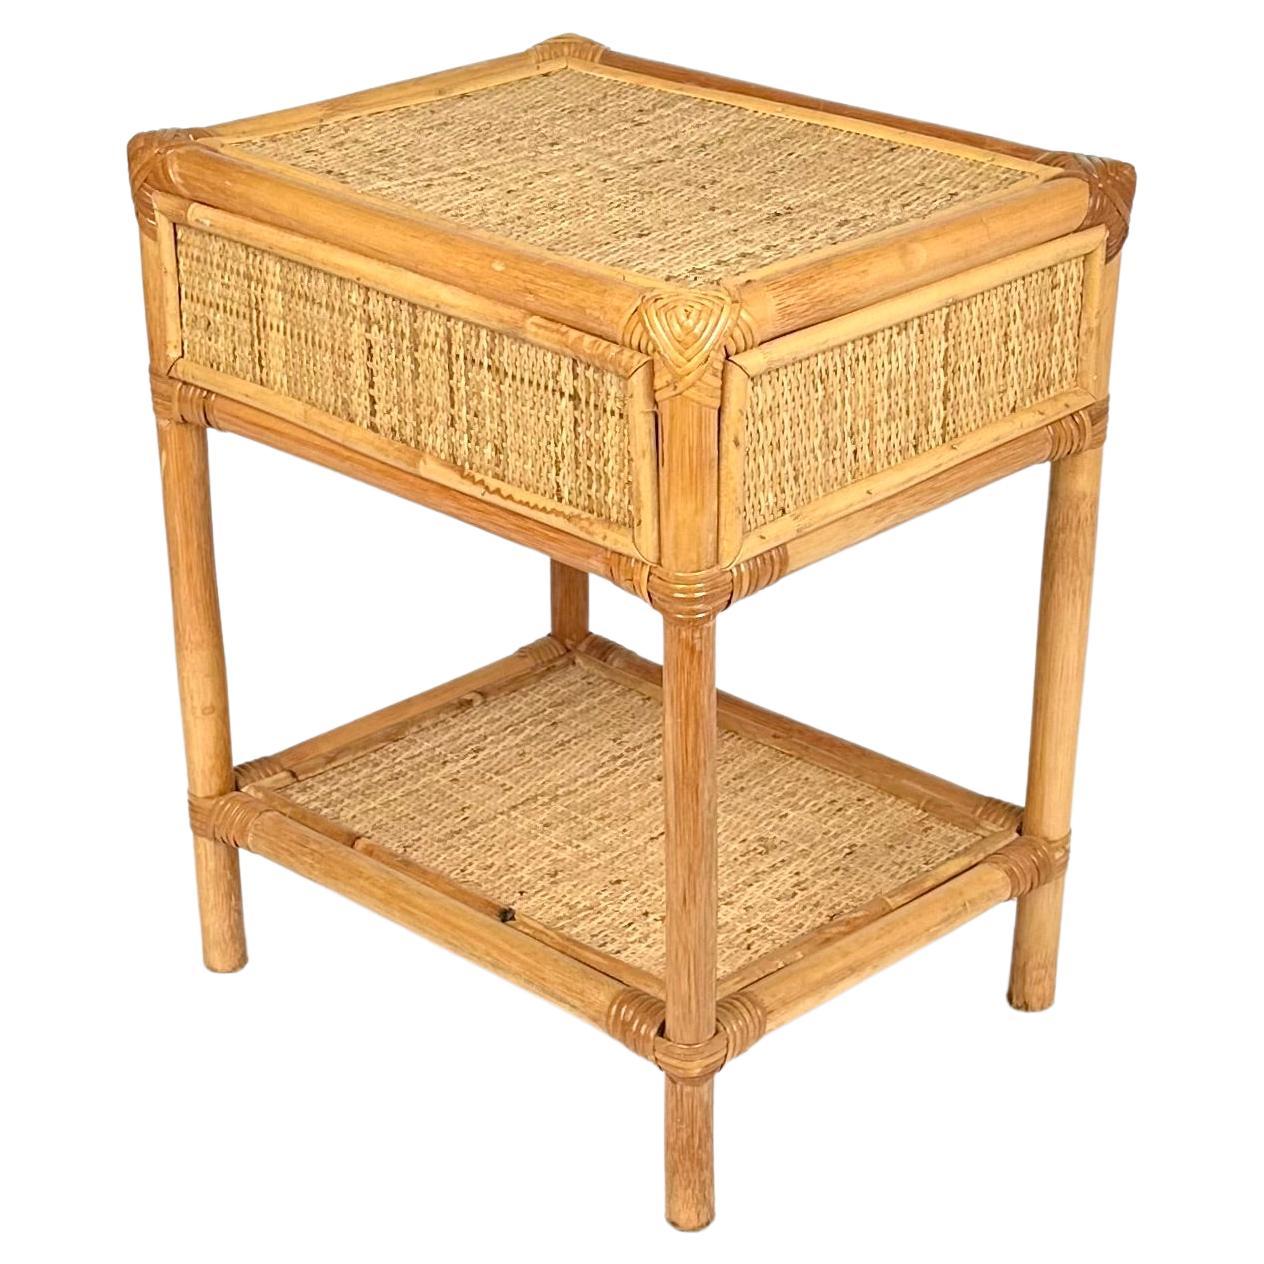 Midcentury Bedside Table Nightstand in Bamboo & Rattan, Italy, 1970s For Sale 4